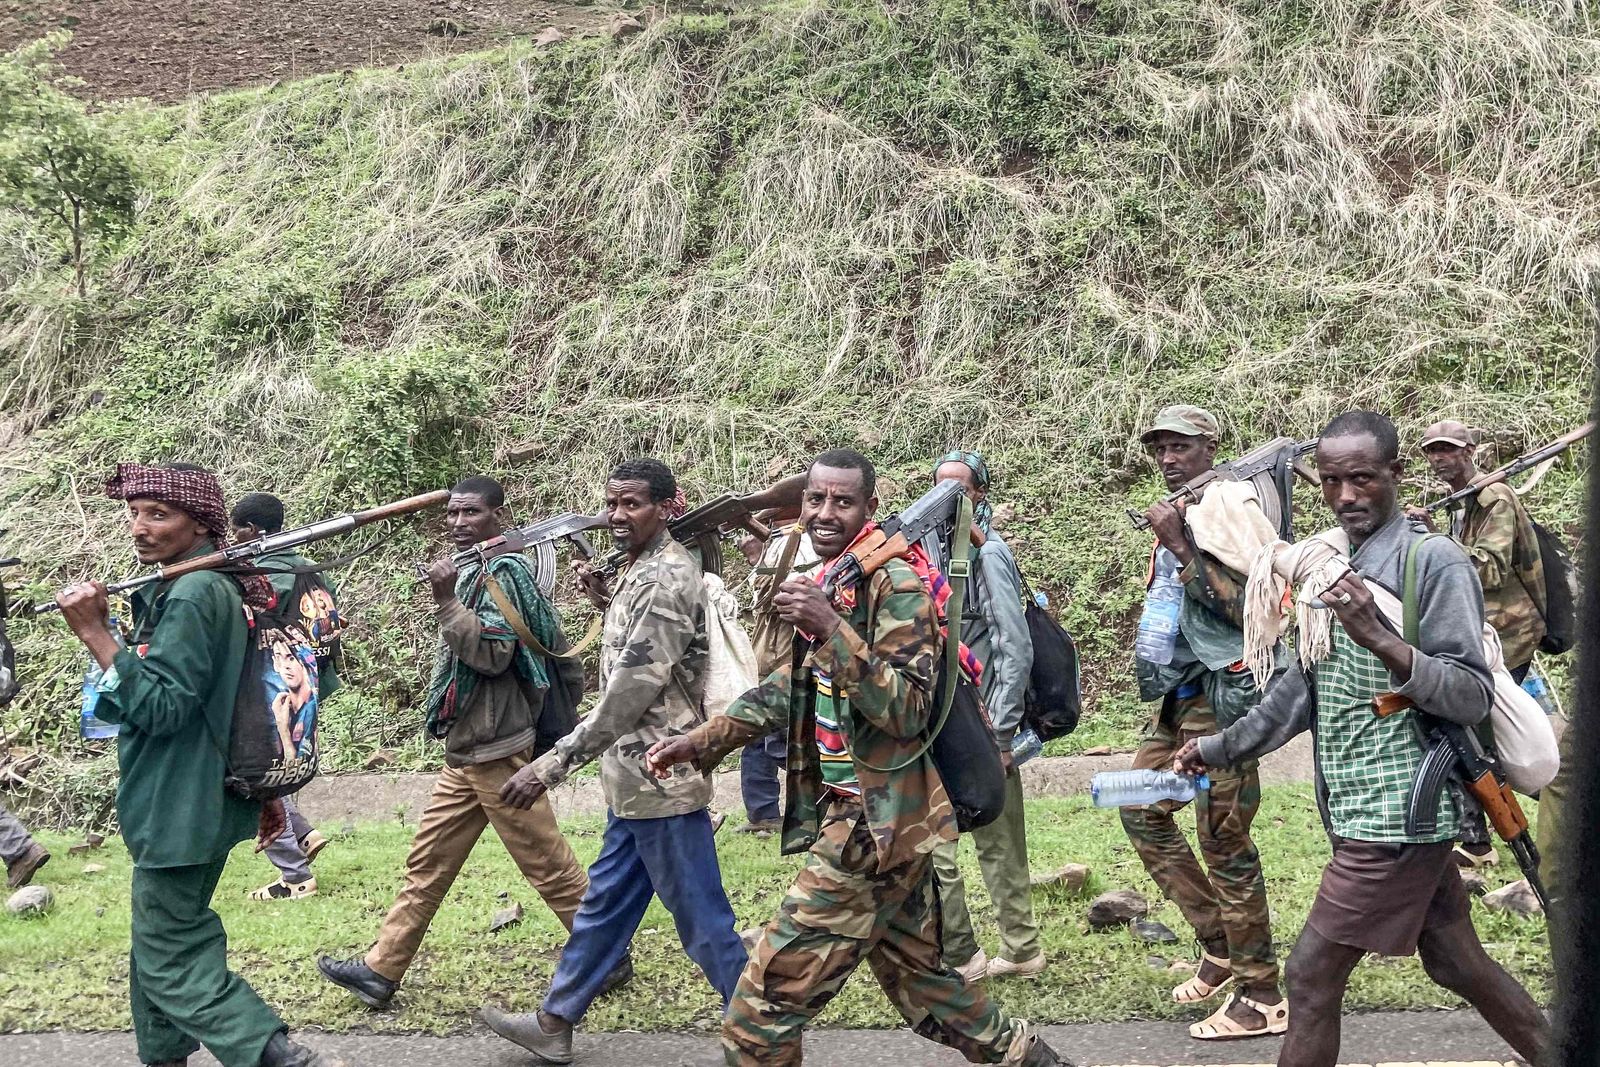 Members of the Amhara militia walk along the road in a rural area near the village of Adi Arkay, 180 kilometers northeast from the city of Gondar, Ethiopia, on July 14, 2021. - On Wednesday the Amhara government spokesman Gizachew Muluneh announced that regional special forces and militias would shift to 